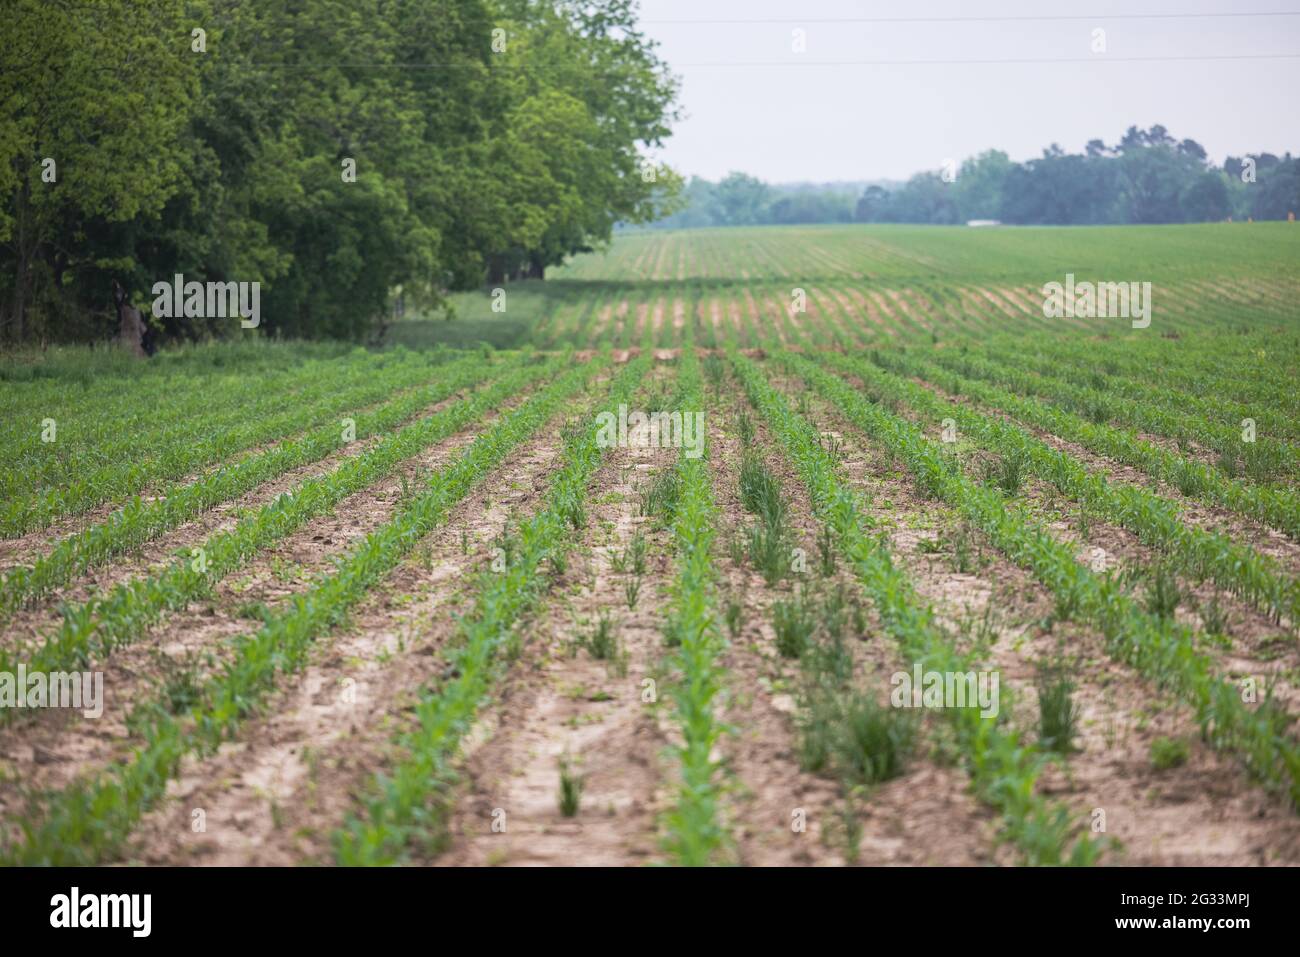 A farm field of young corn beginning to grow in rows Stock Photo